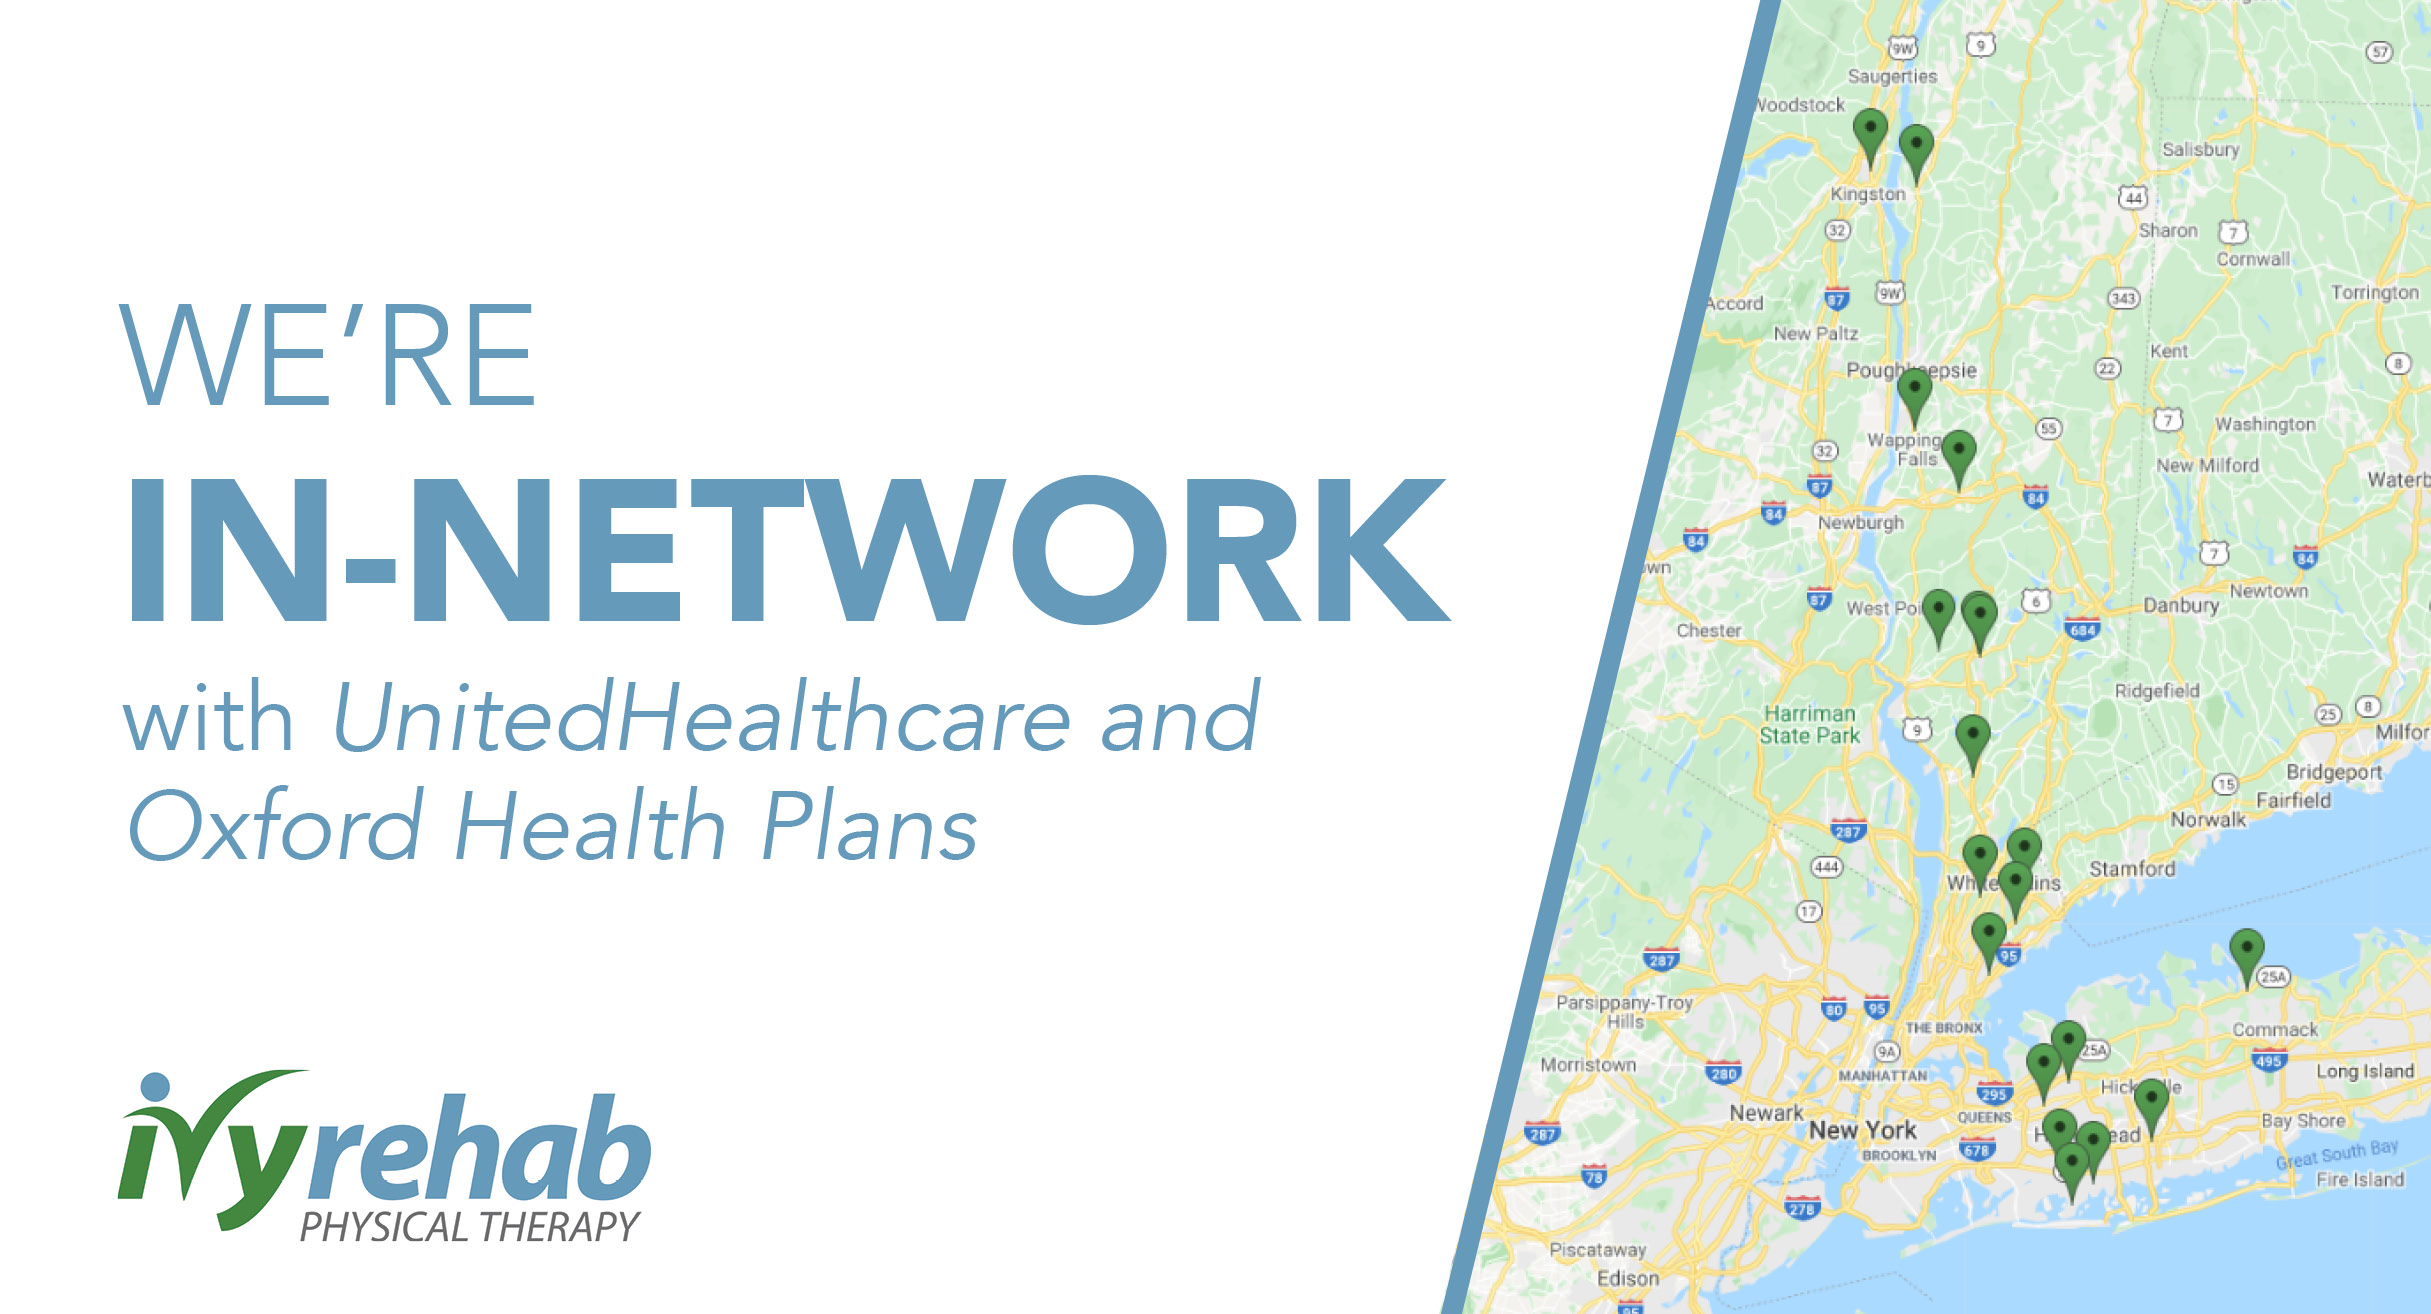 Ivy Rehab is Now In-Network with UnitedHealthcare and Oxford in NY